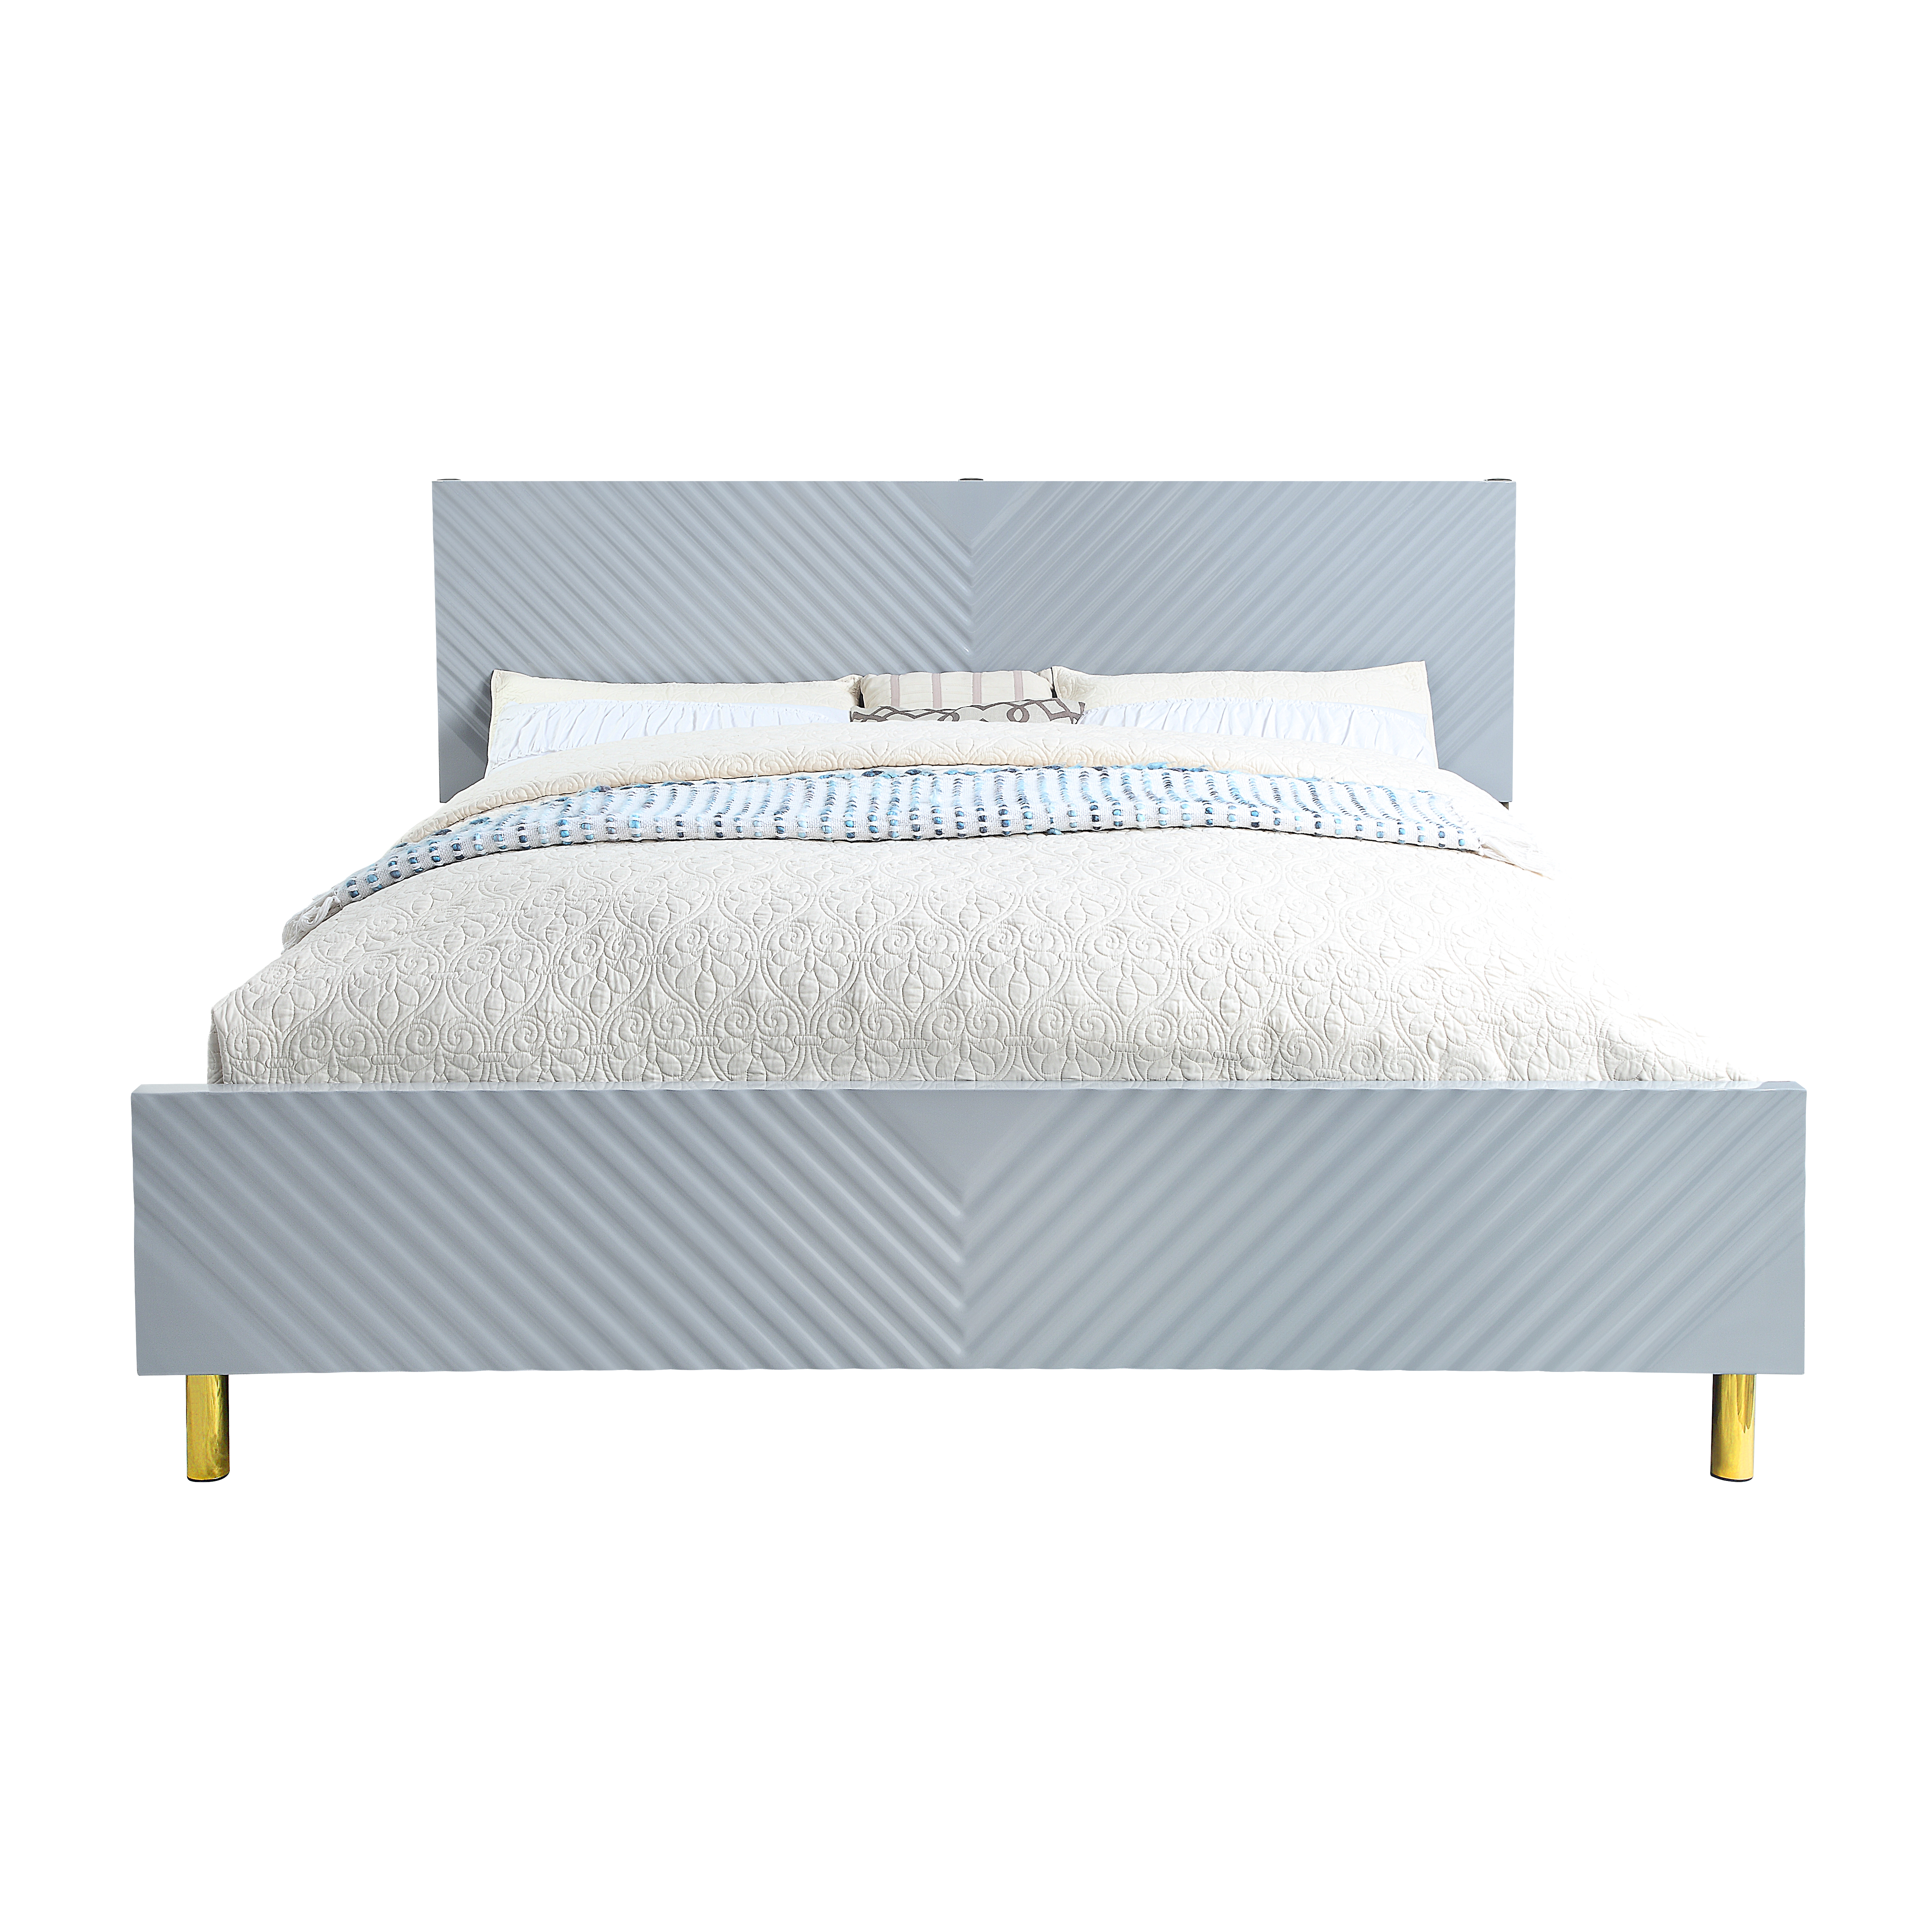 ACME Gaines Queen Bed, Gray High Gloss Finish